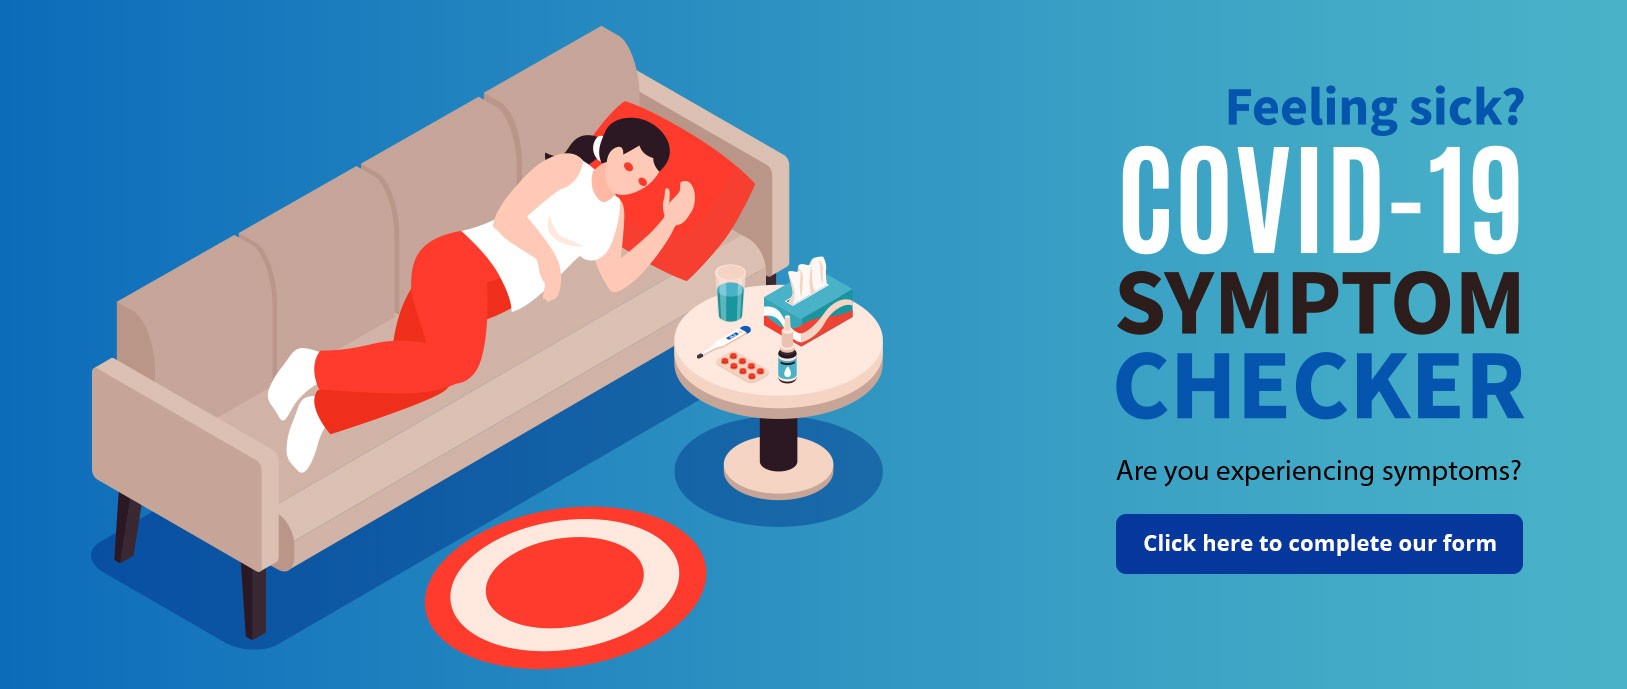 Banner Graphic of a woman lying down on a couch next to a side table that has a cup of water, Kleenex, pills, nasal spray, and thermometer. Banner says:

Feeling Sick?
Covid-19
SYMTOM CHECKER
Are you experiencing symptoms?
Click here to complete our form